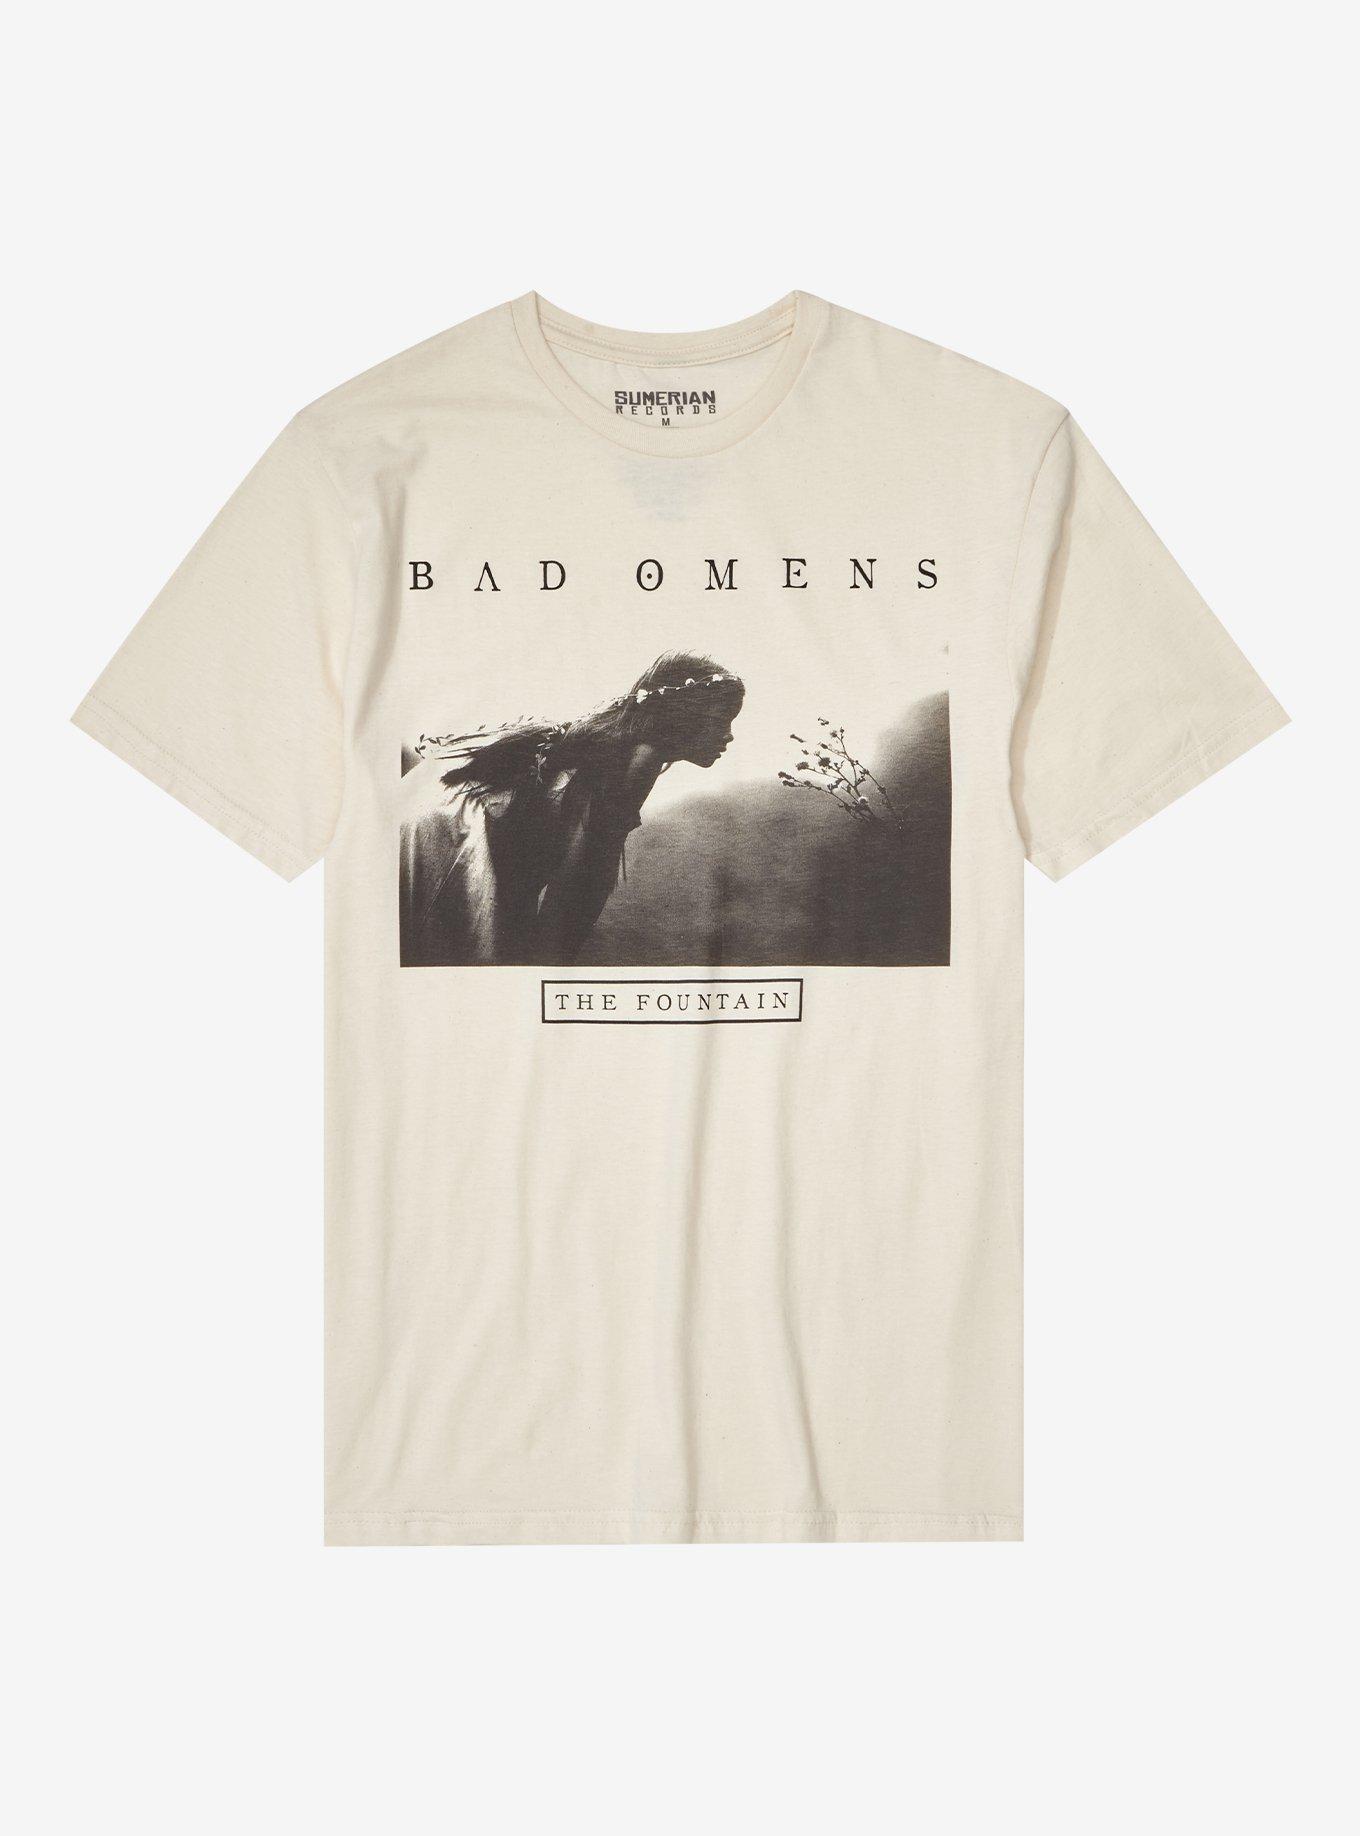 Bad Omens Band Track List Jungle Tour T-shirt,Sweater, Hoodie, And